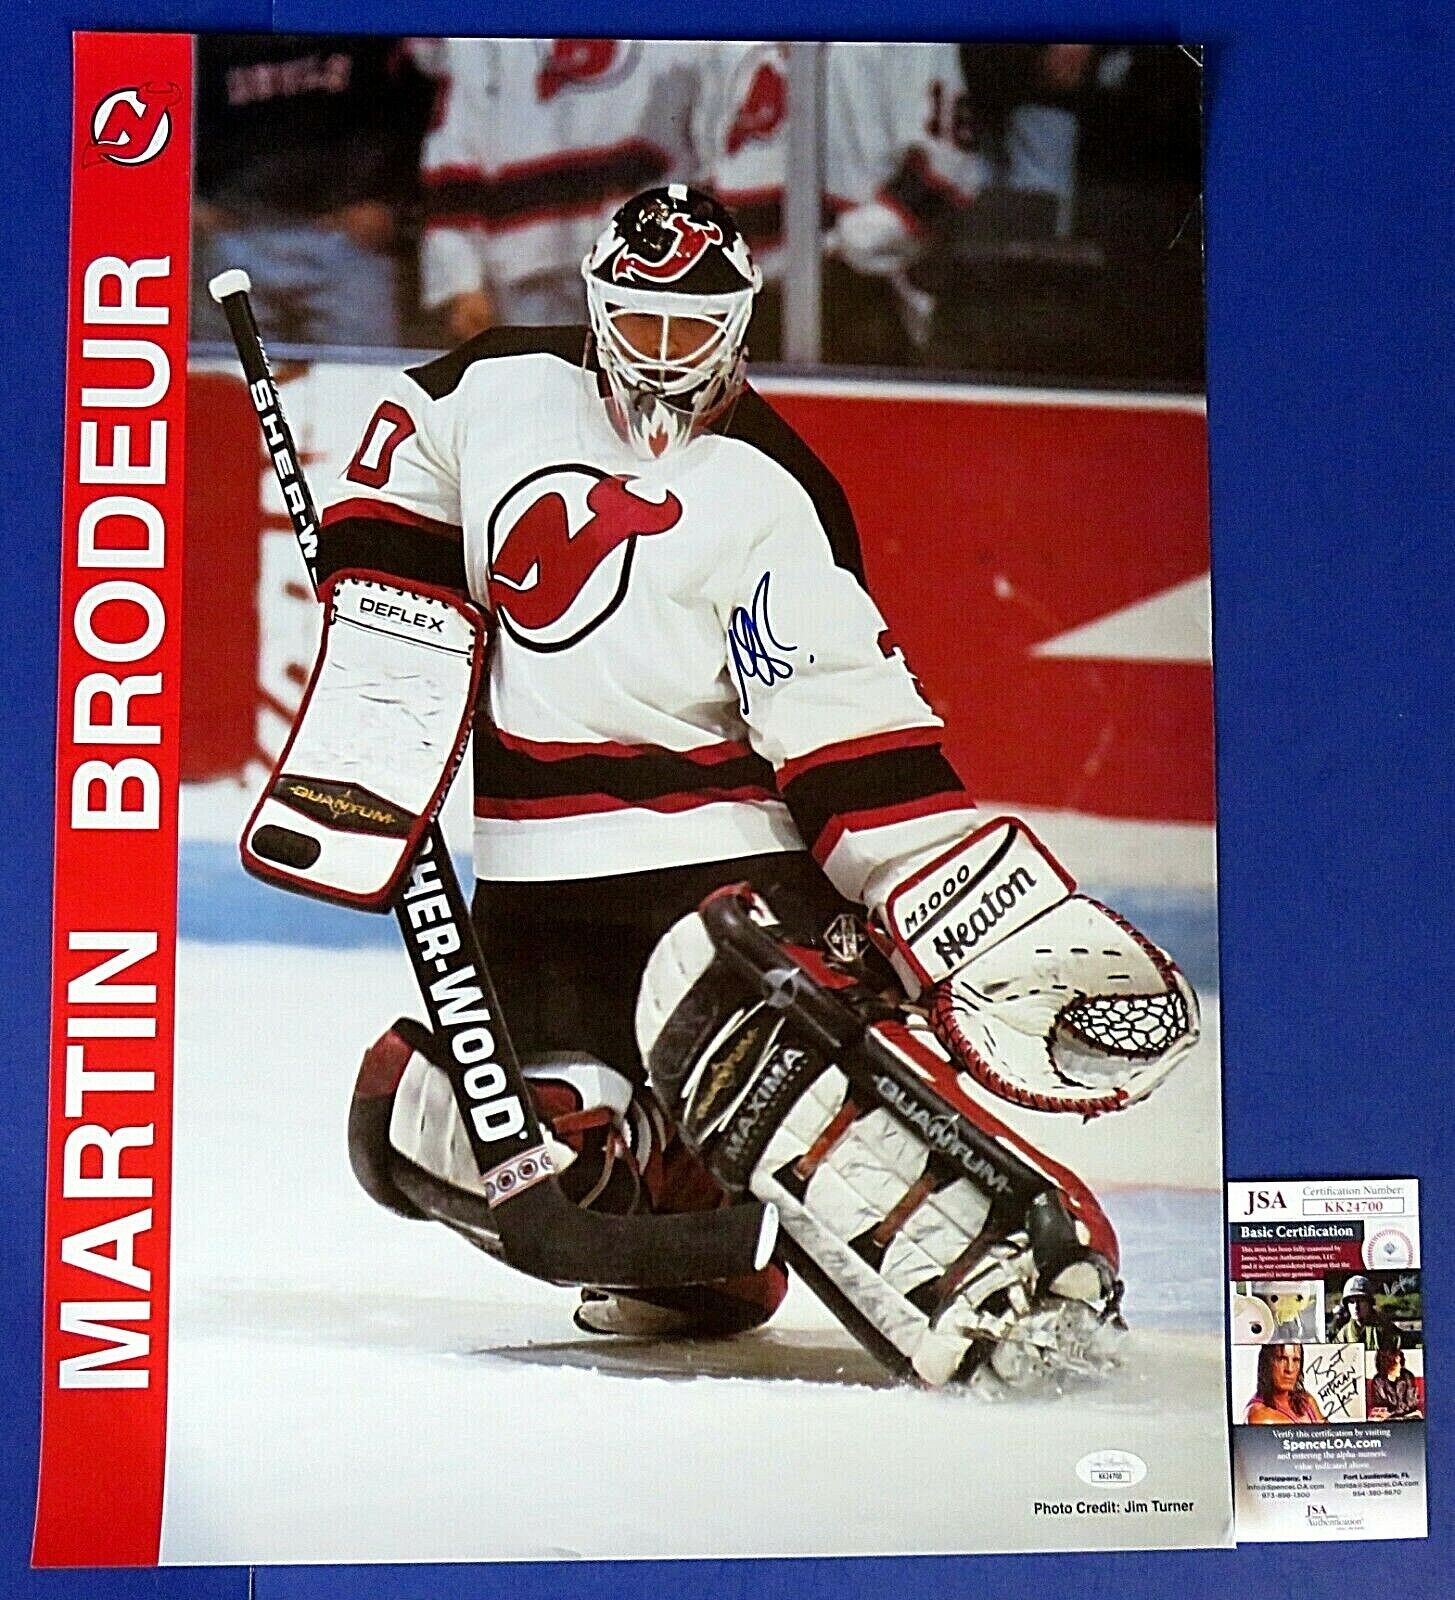 New Jersey Devils Martin Brodeur Signed Koho Jersey Youth L/XL